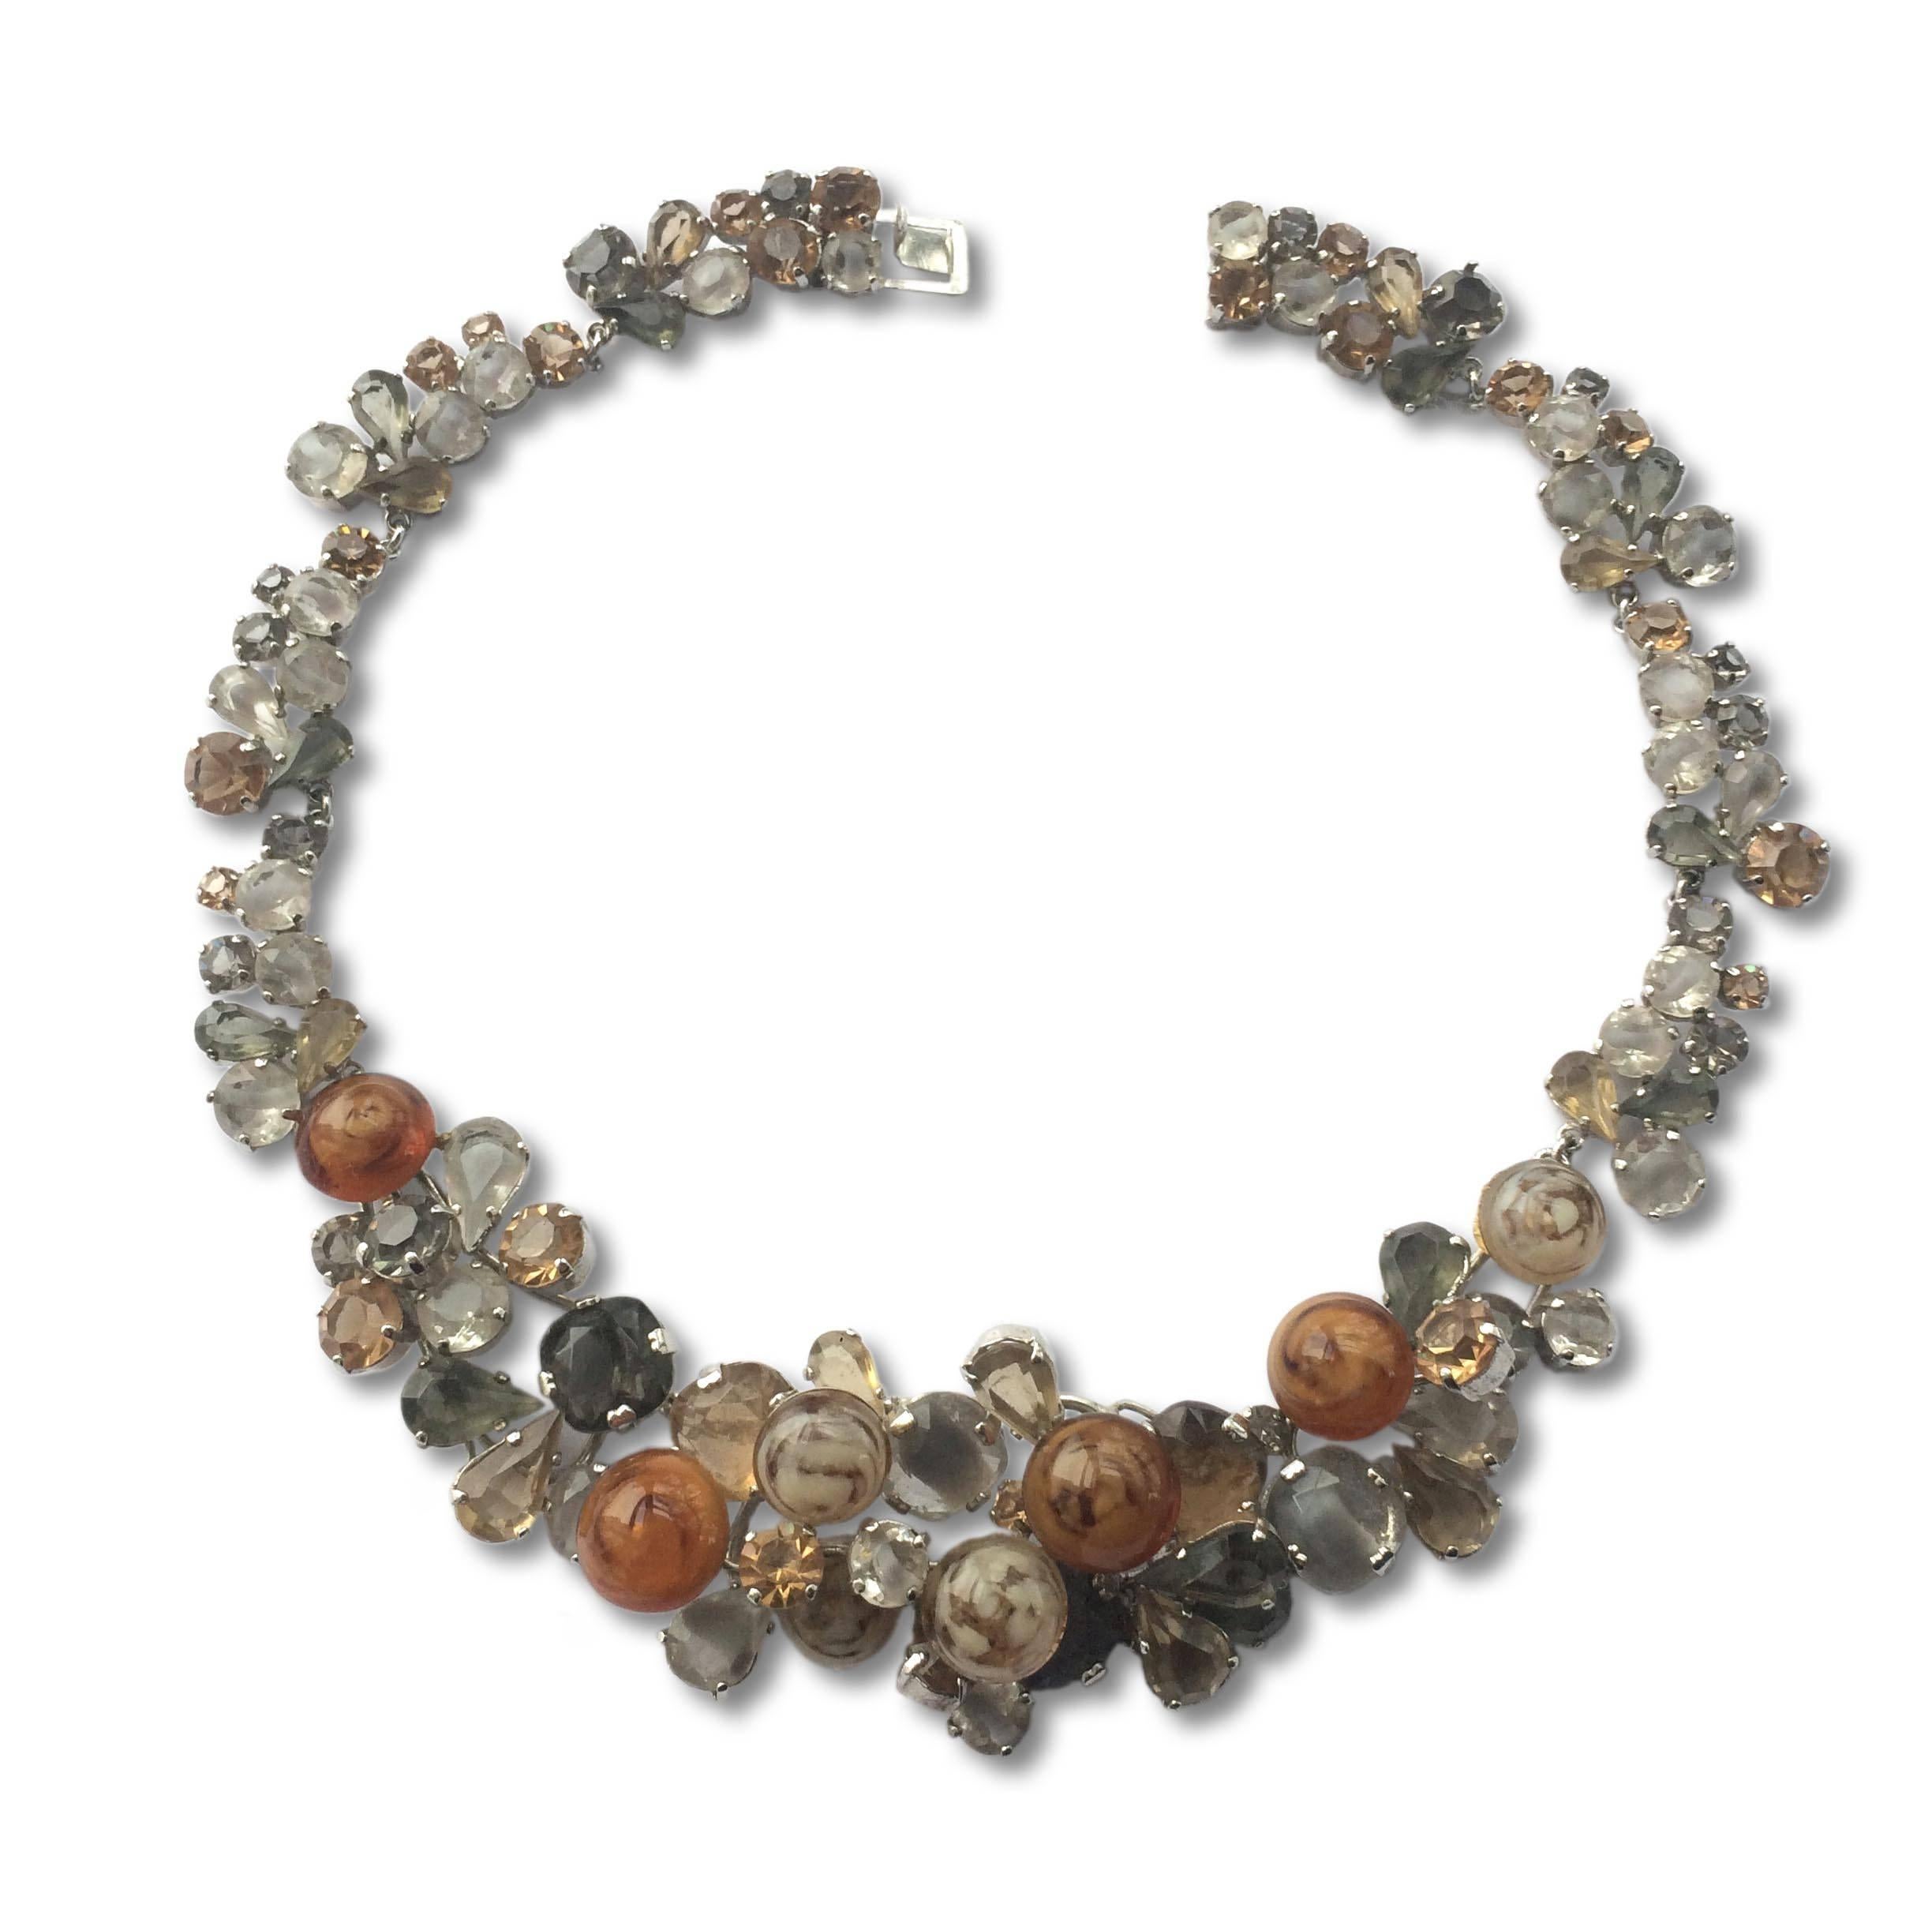 A wonderful necklace from Christian Dior, 1958 being the first year of Yves Saint Laurent installed as head designer. Made from unusual 'marbled' glass cabuchons, and unusual cuts and colours of stones, unique to this collection, they form a melange